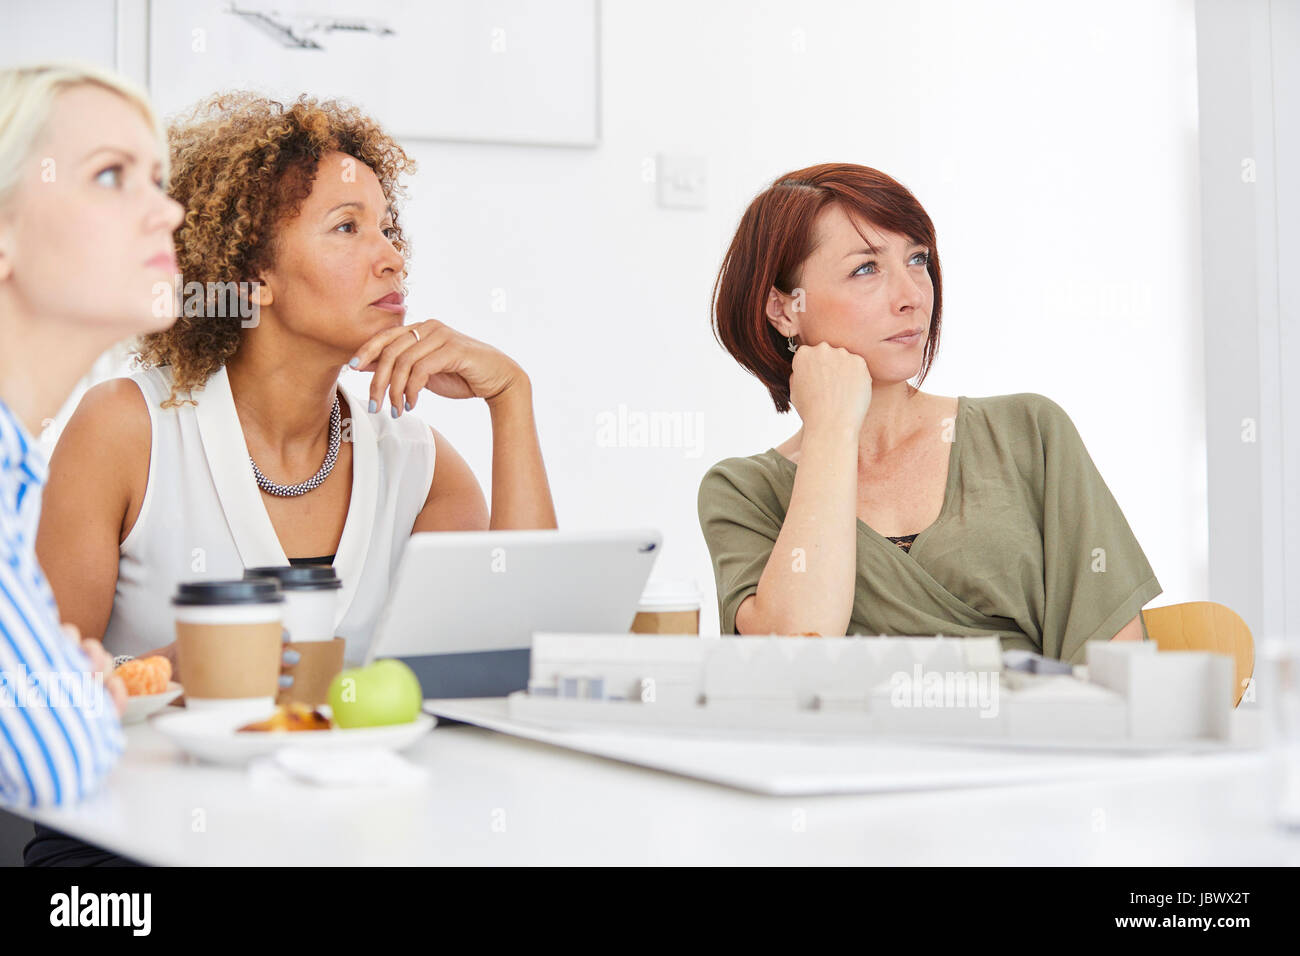 Female architect team listening during meeting Stock Photo